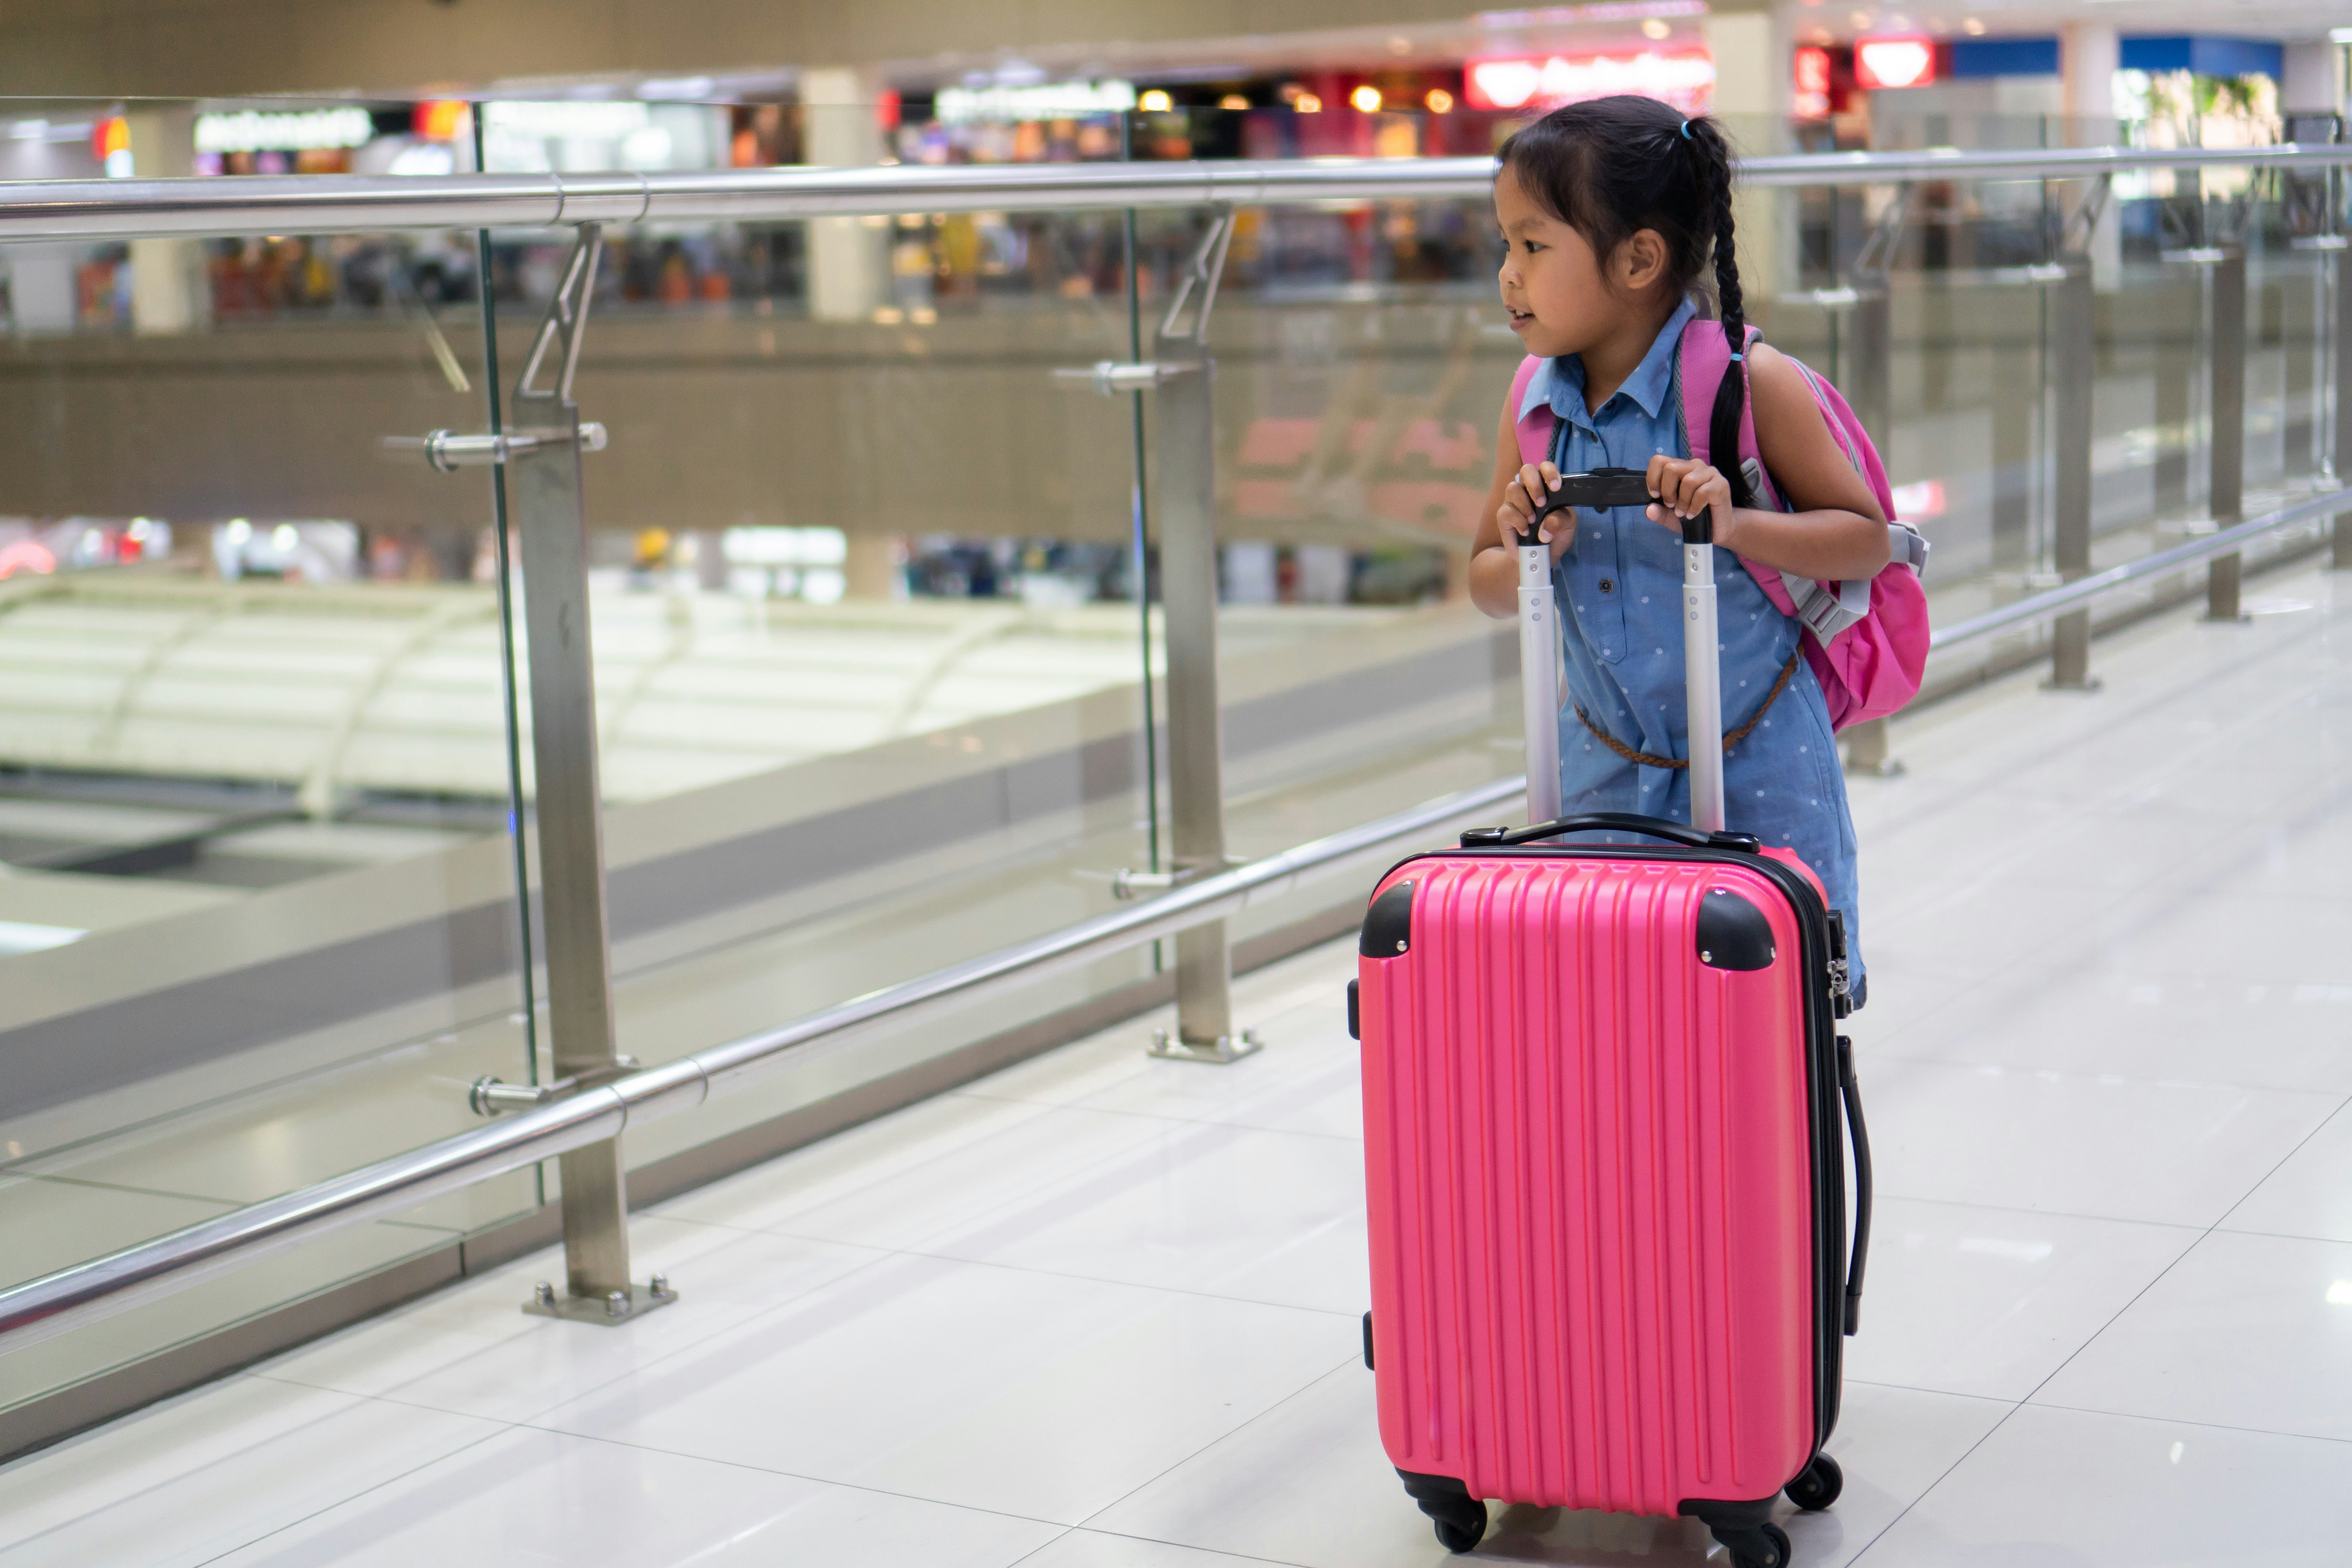 Cute Asian Child Girl With Backpack Holding Suitcase Waiting for Boarding In the Airport